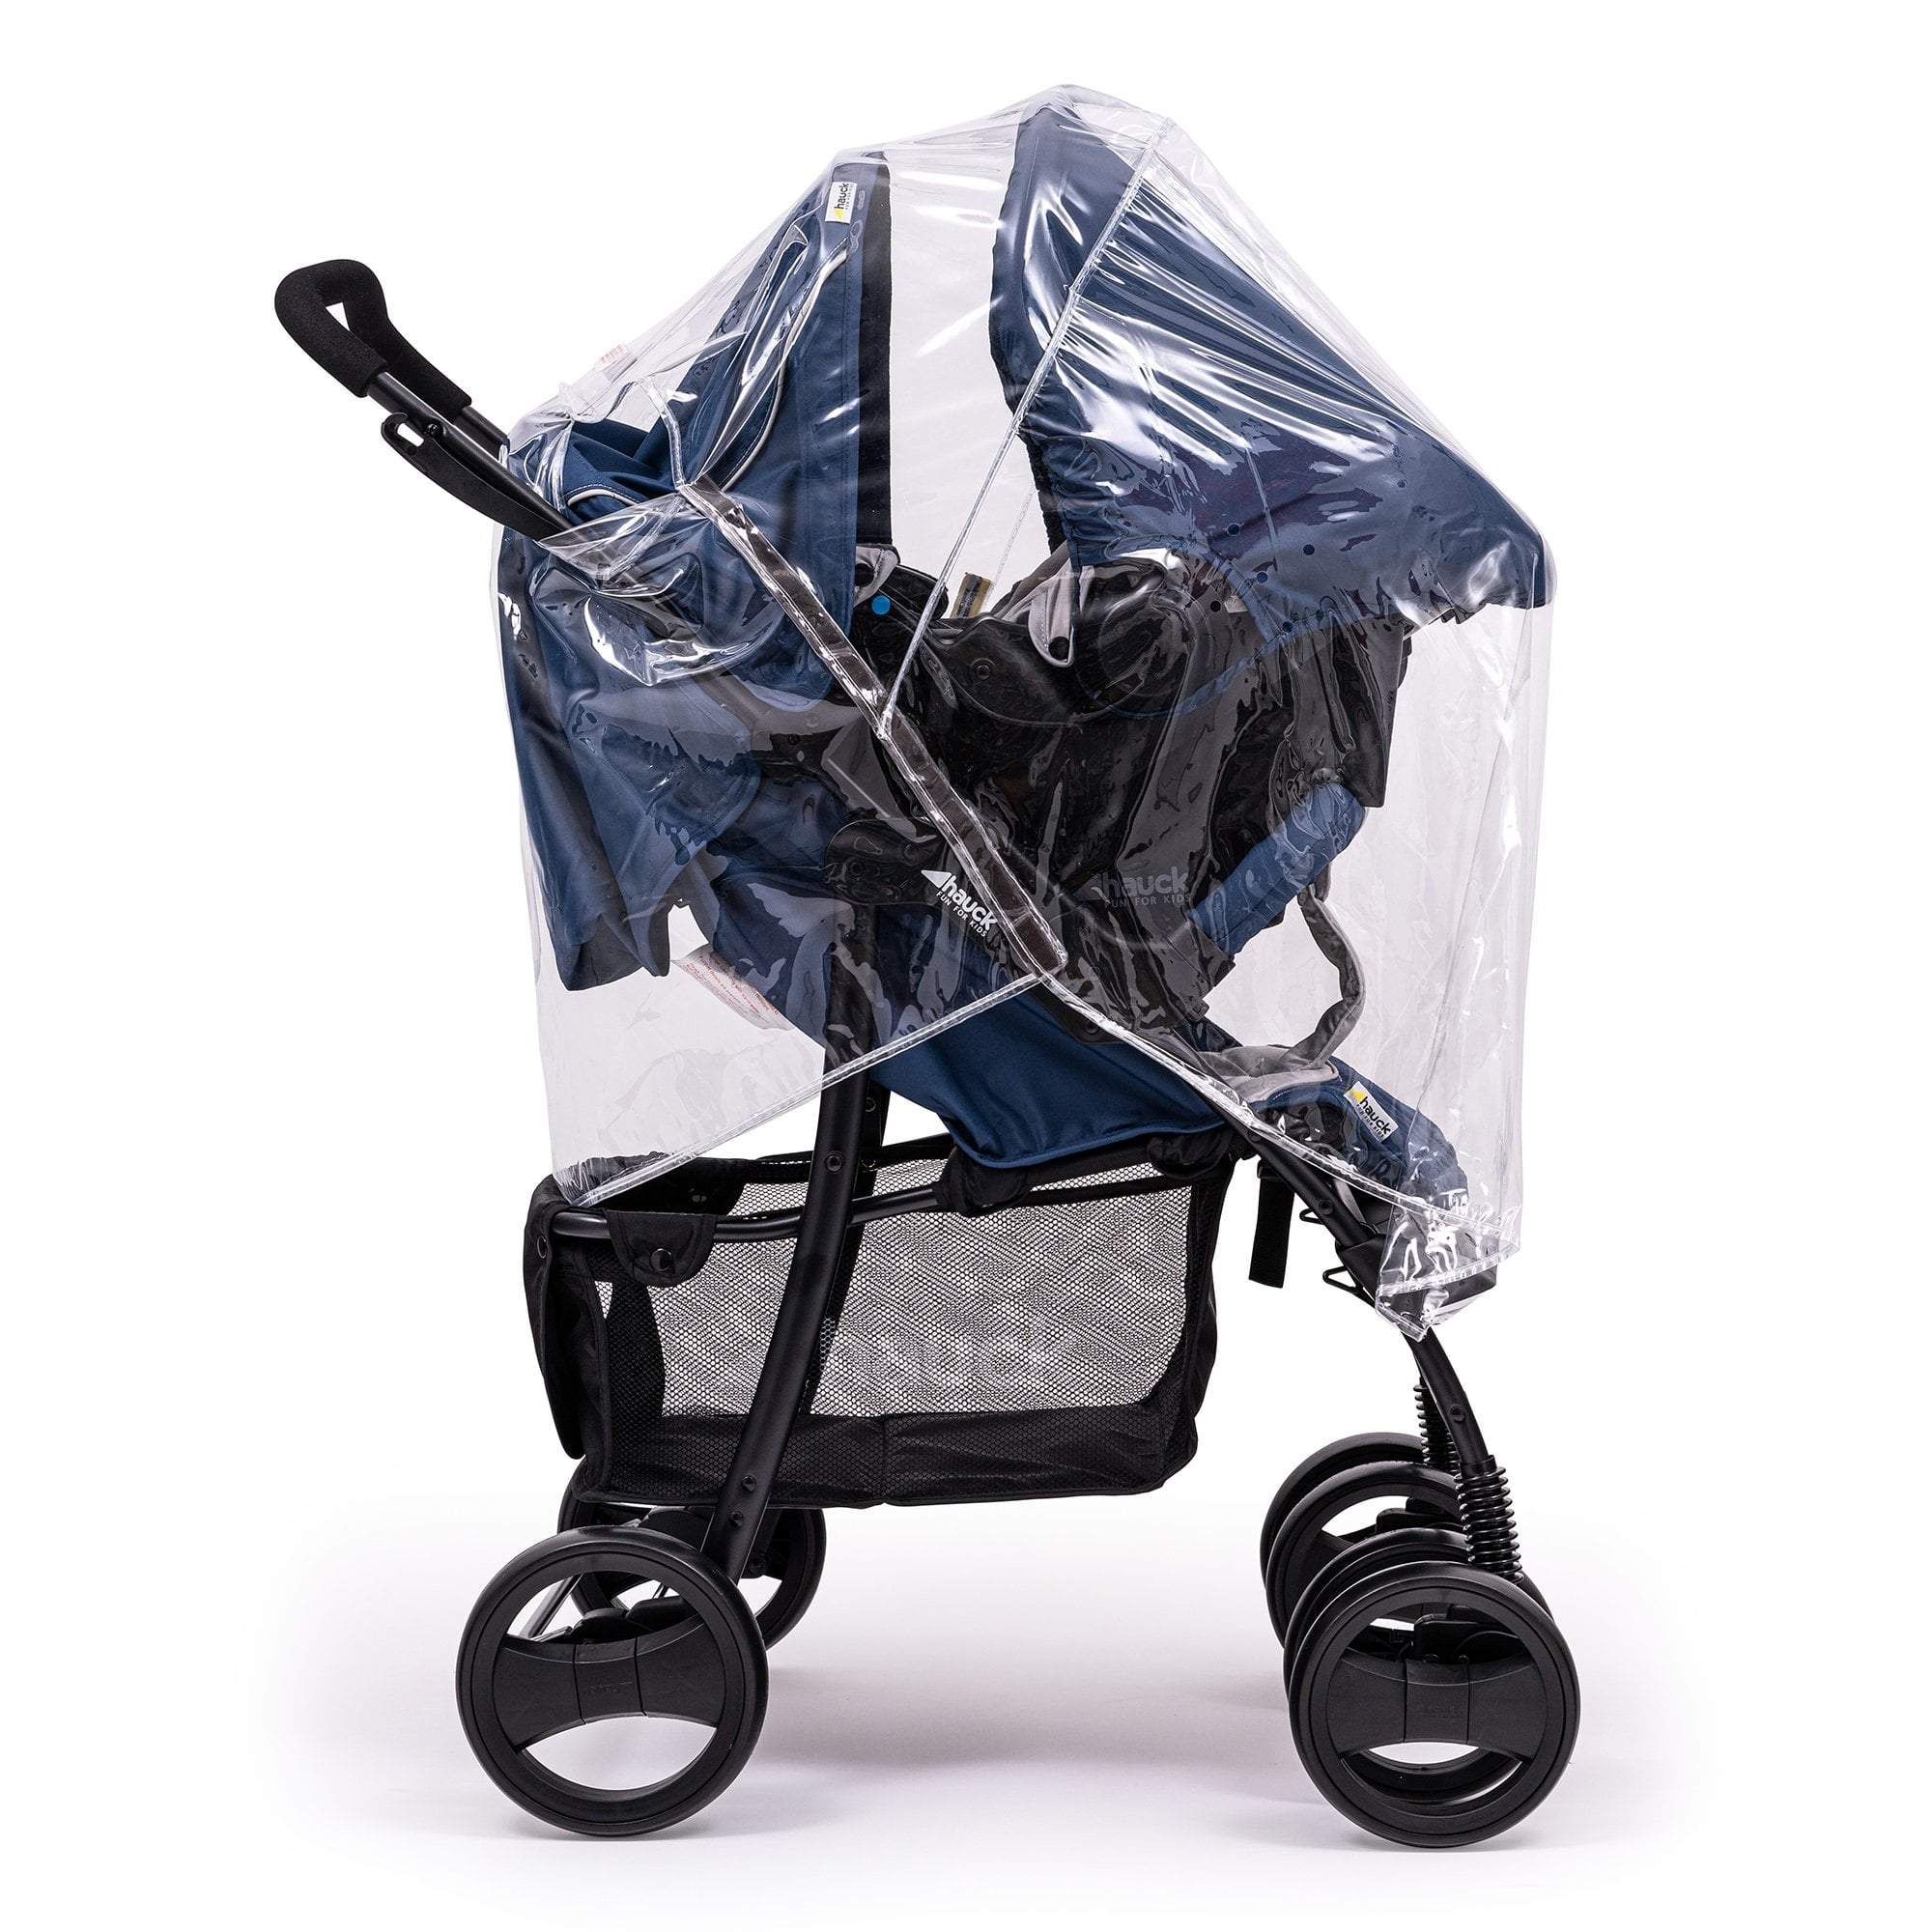 Travel System Raincover Compatible with Hesba - Fits All Models - For Your Little One